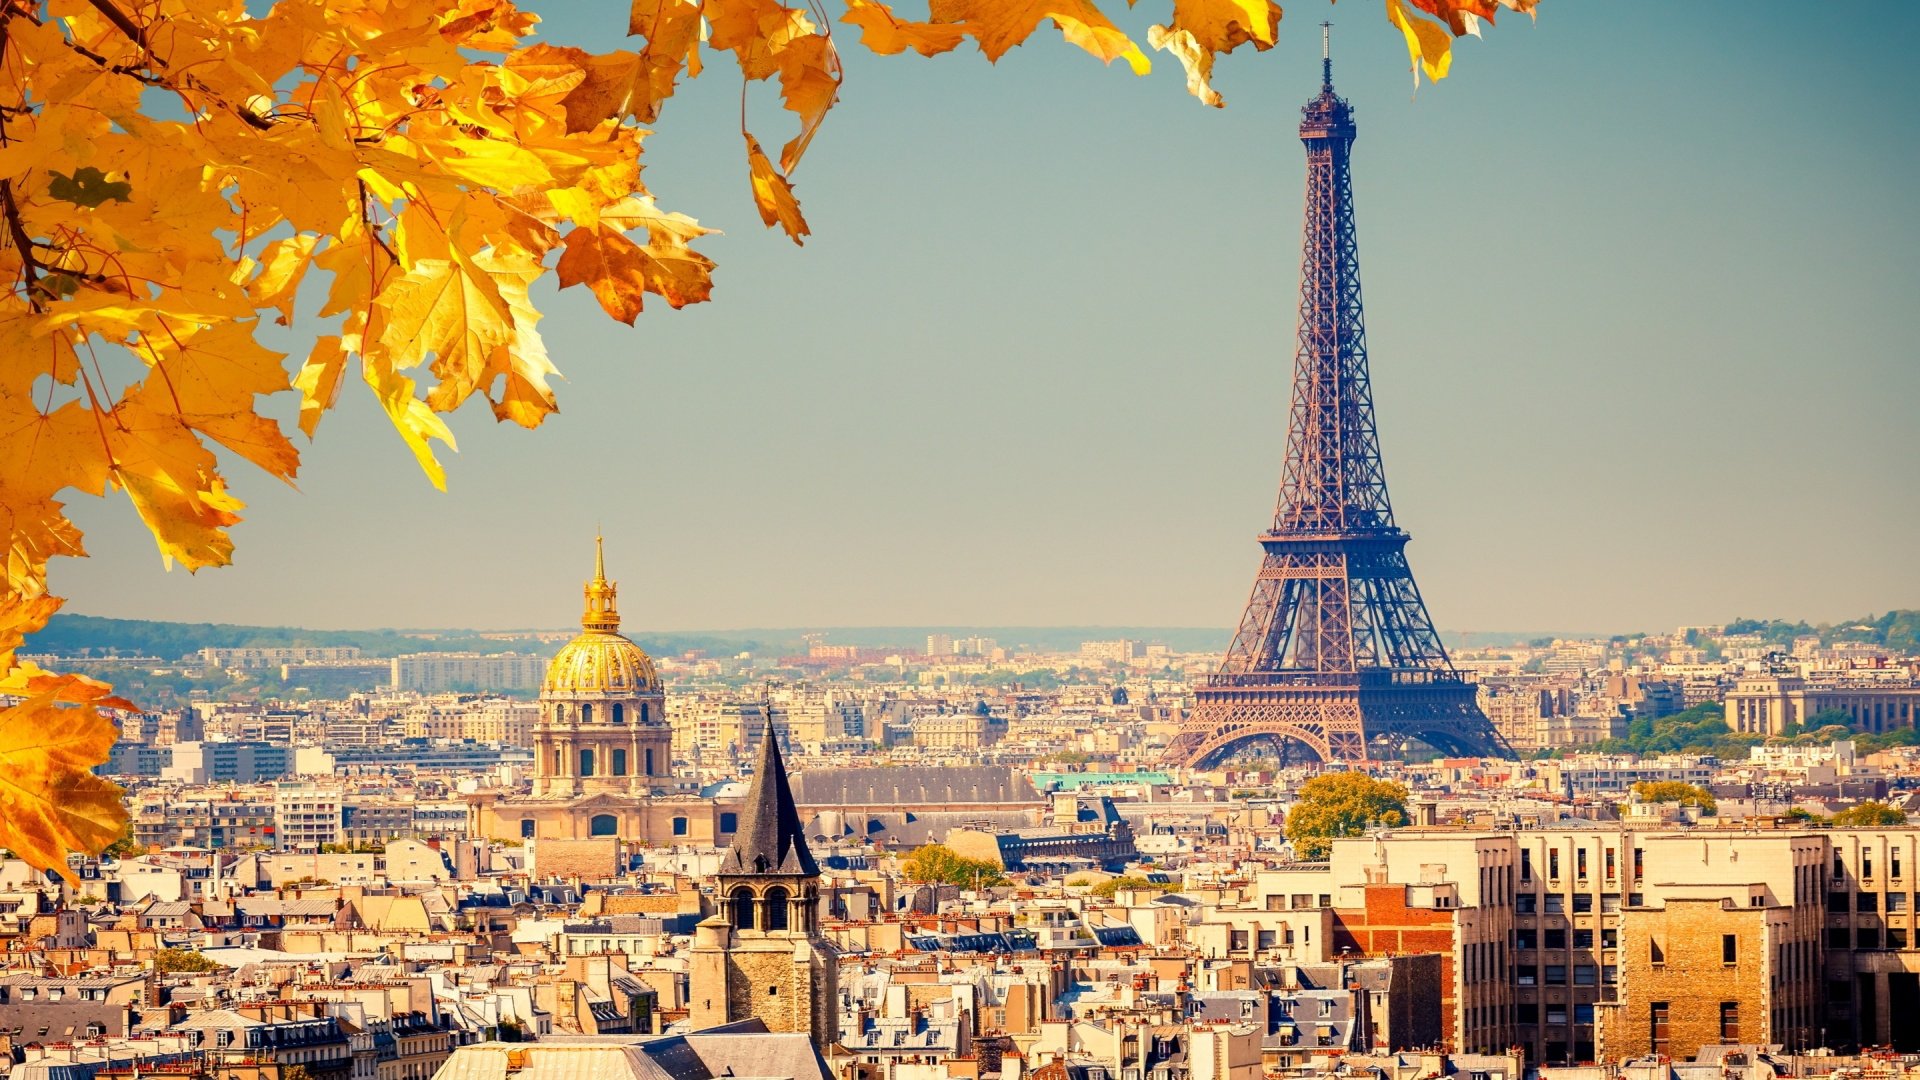 35 HD Paris Backgrounds The City Of Lights And Romance